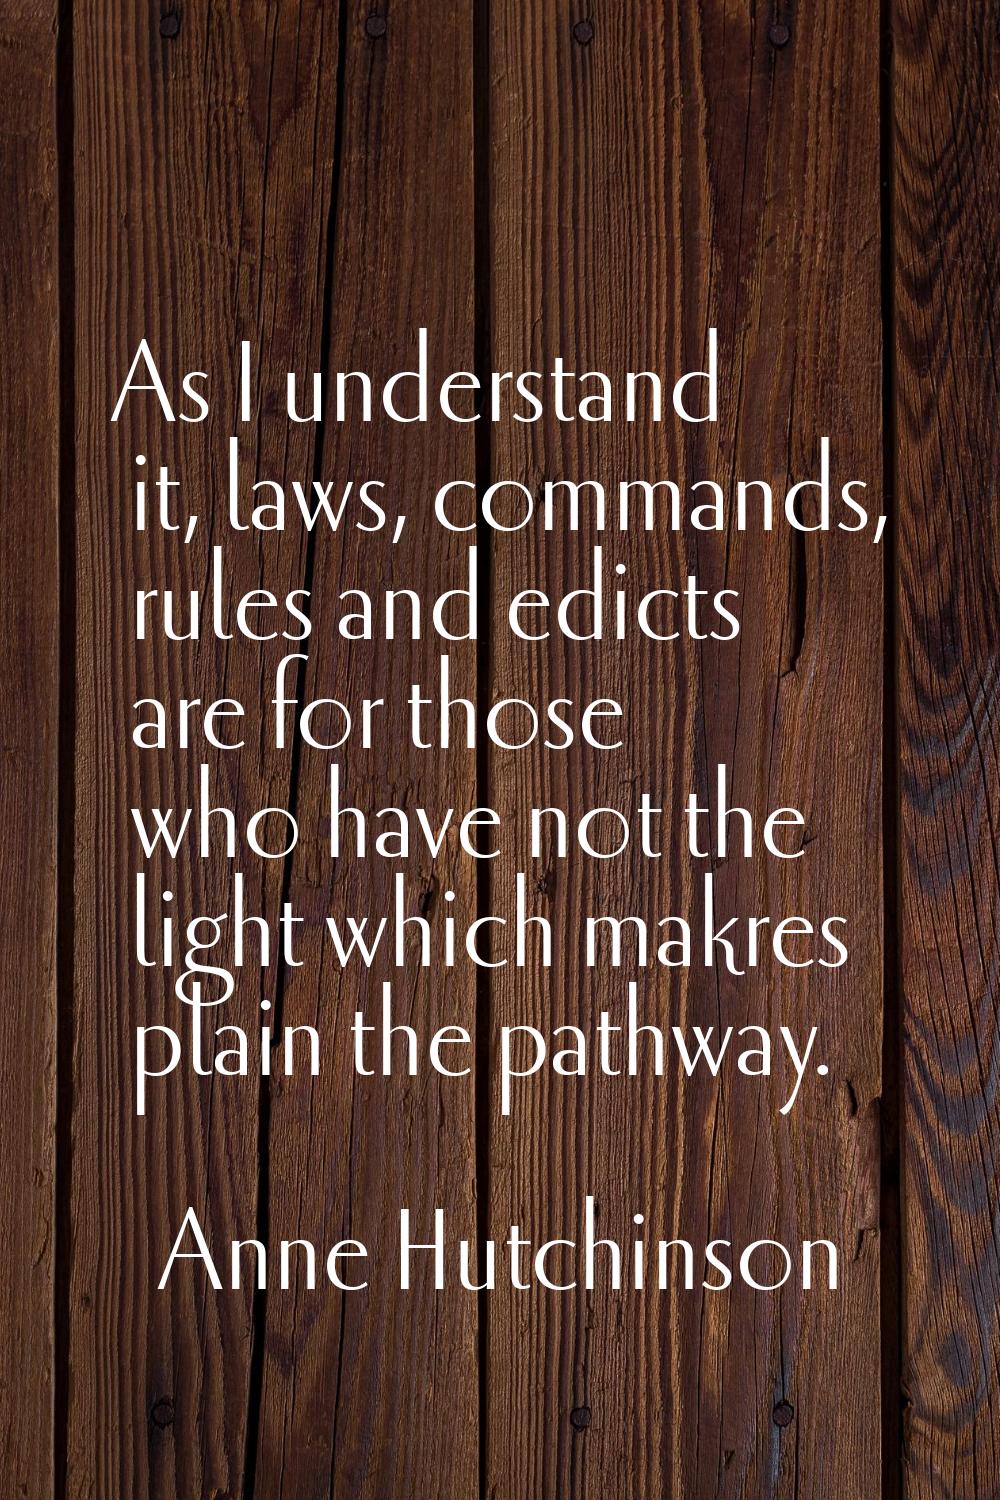 As I understand it, laws, commands, rules and edicts are for those who have not the light which mak